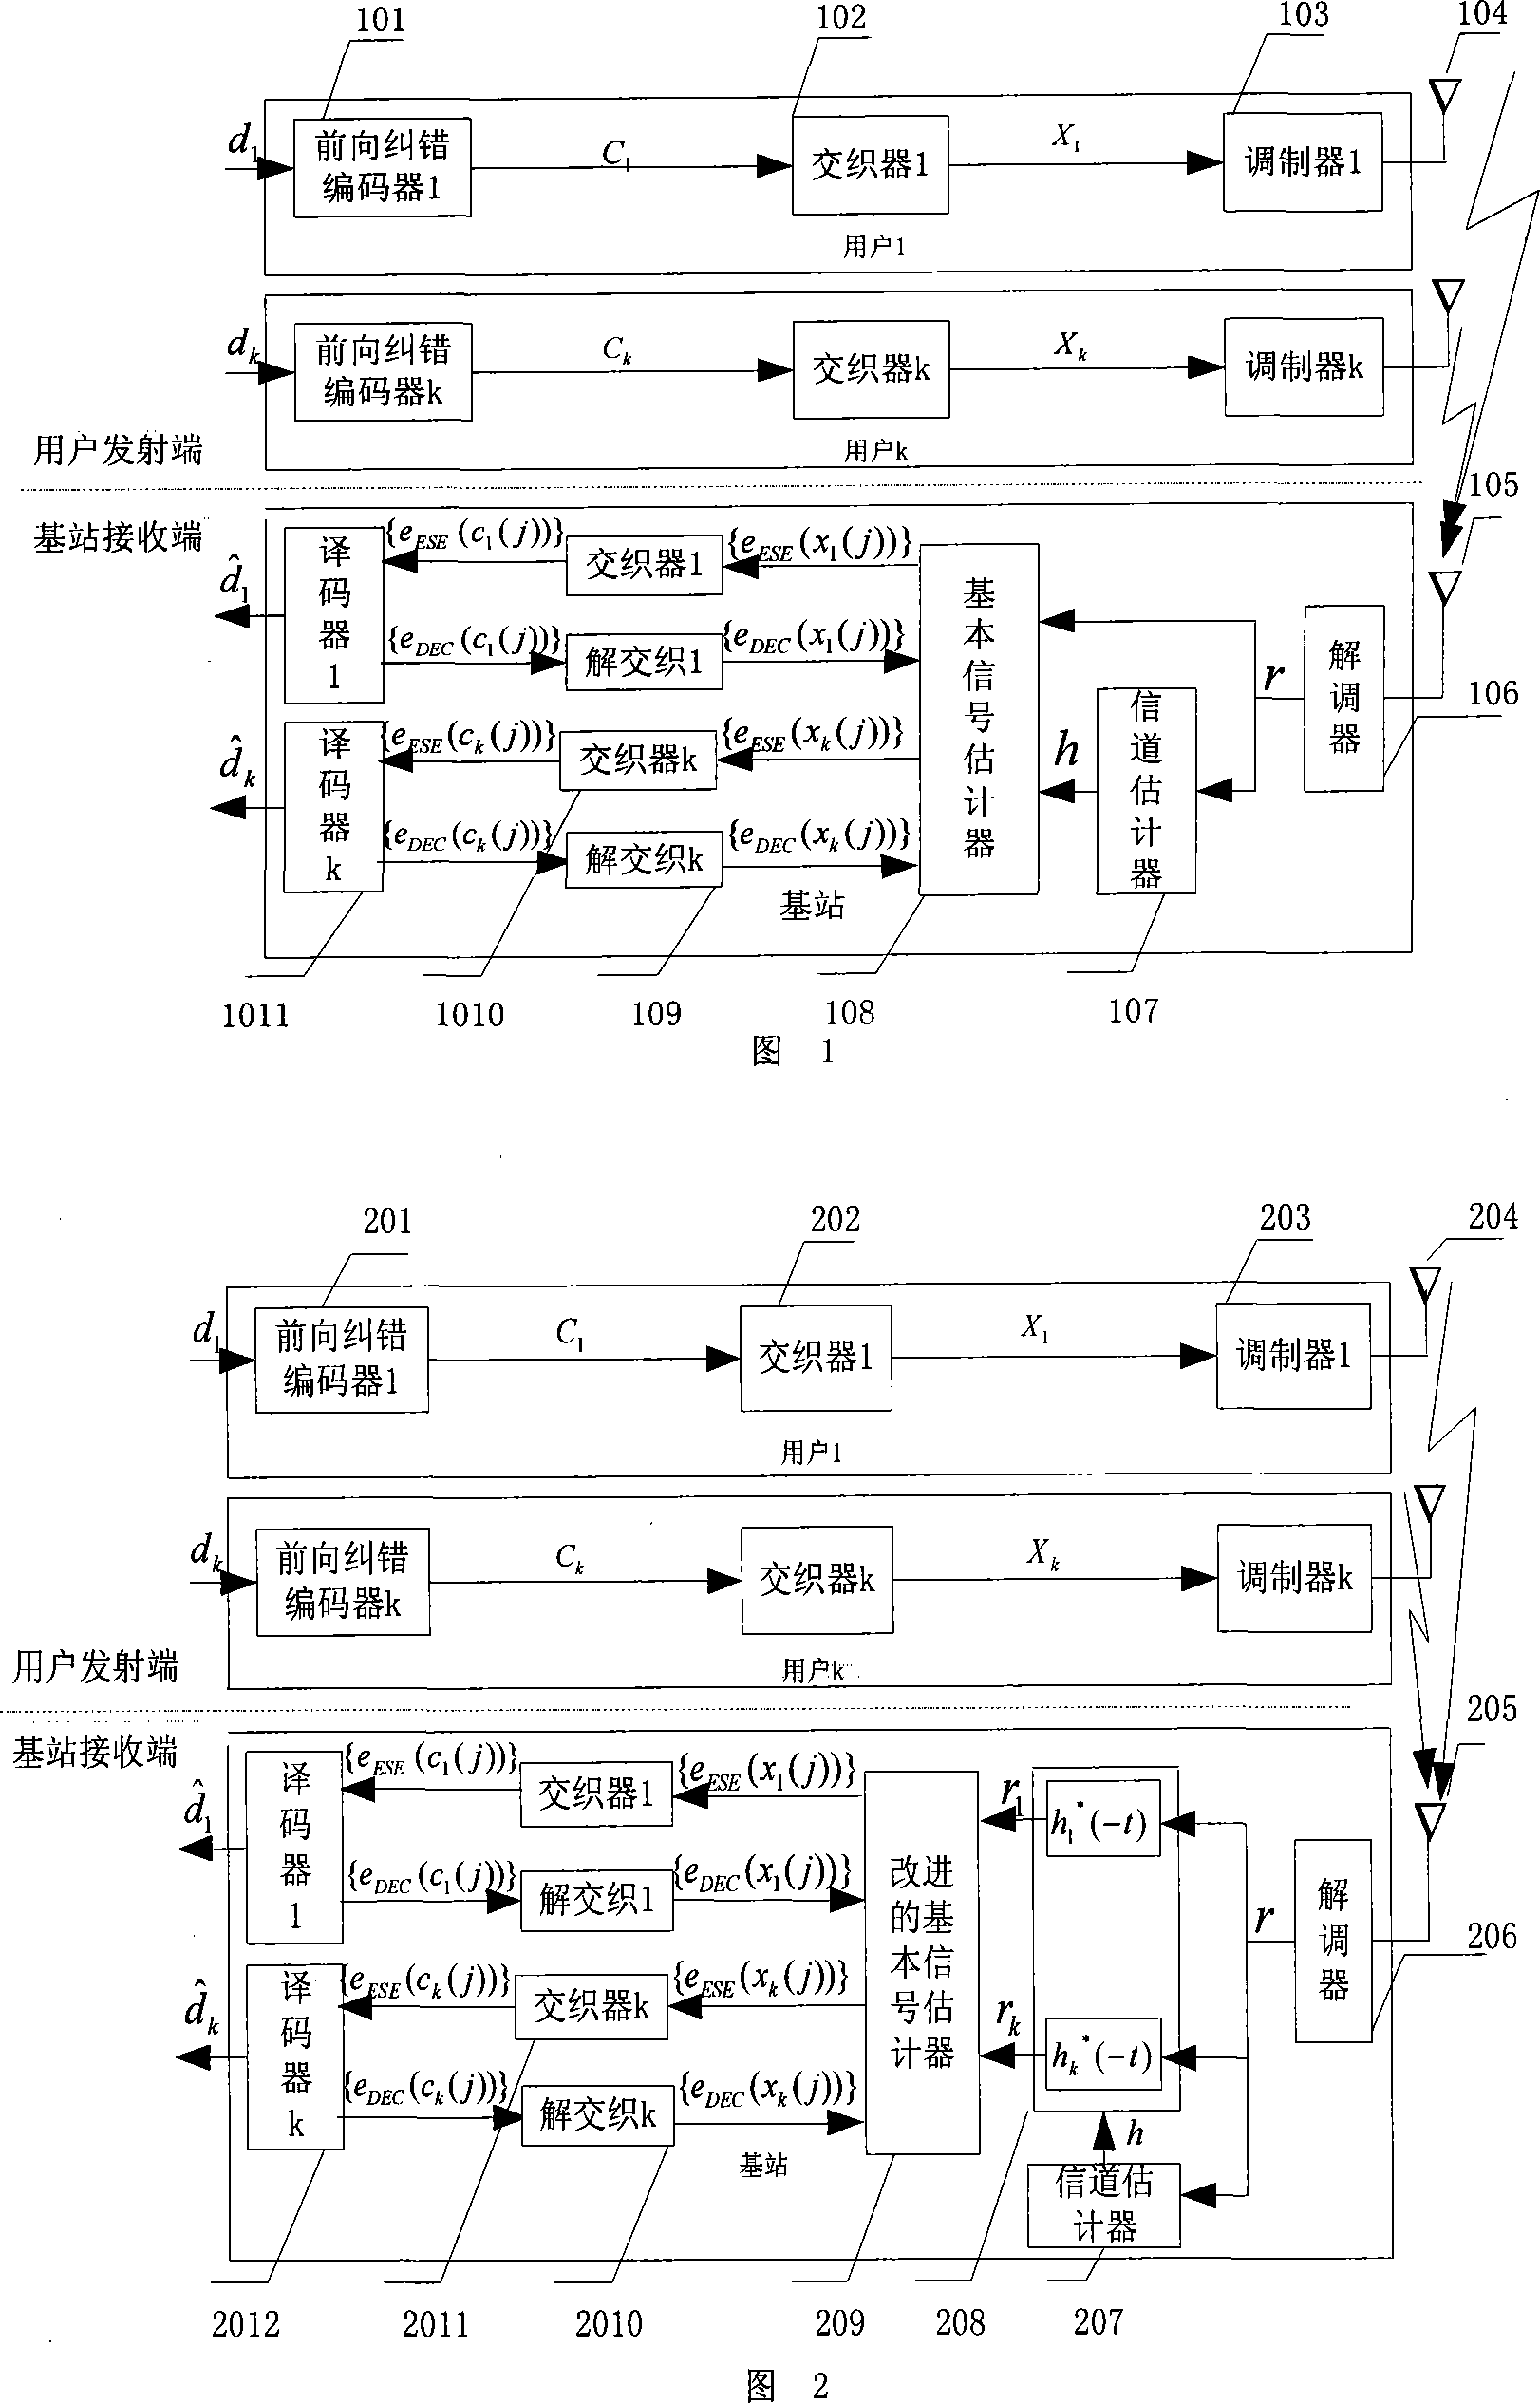 Time division multiplex and time reversal based IDMA wireless communication scheme